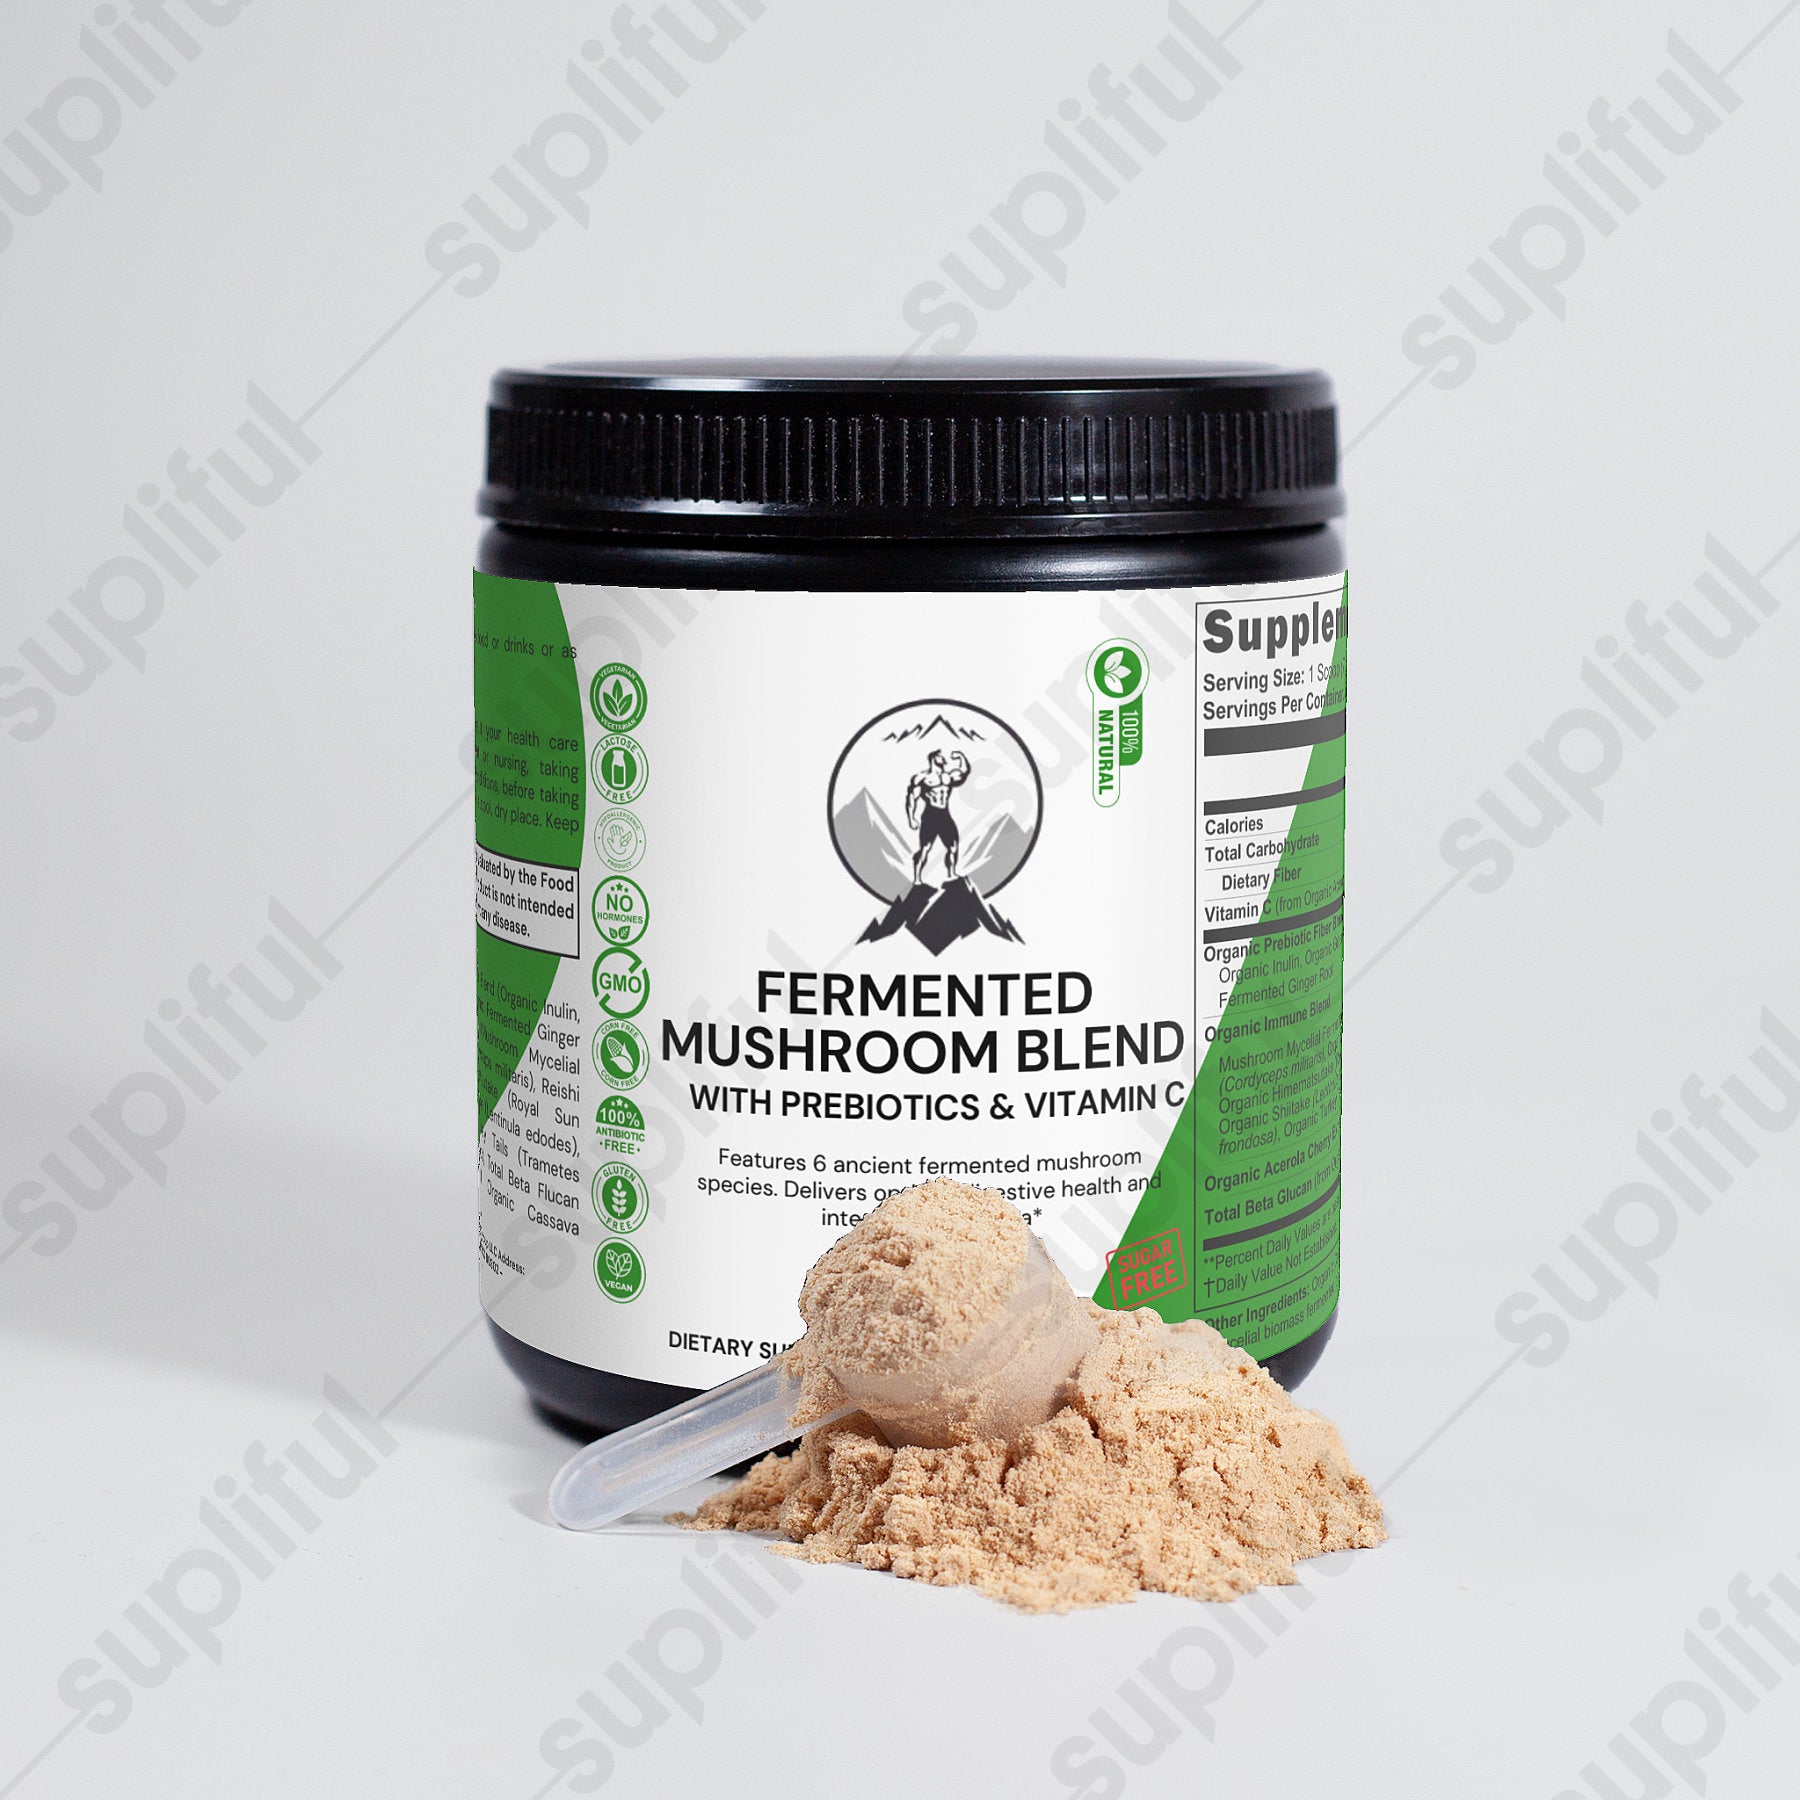 Fermented Mushroom BlendNatural ExtractsFermented Mushroom Blend is a premium product featuring six different types of organically grown, fermented mushrooms in their full-spectrum state. This blend is desFermented Mushroom BlendThe Rocky Ranger